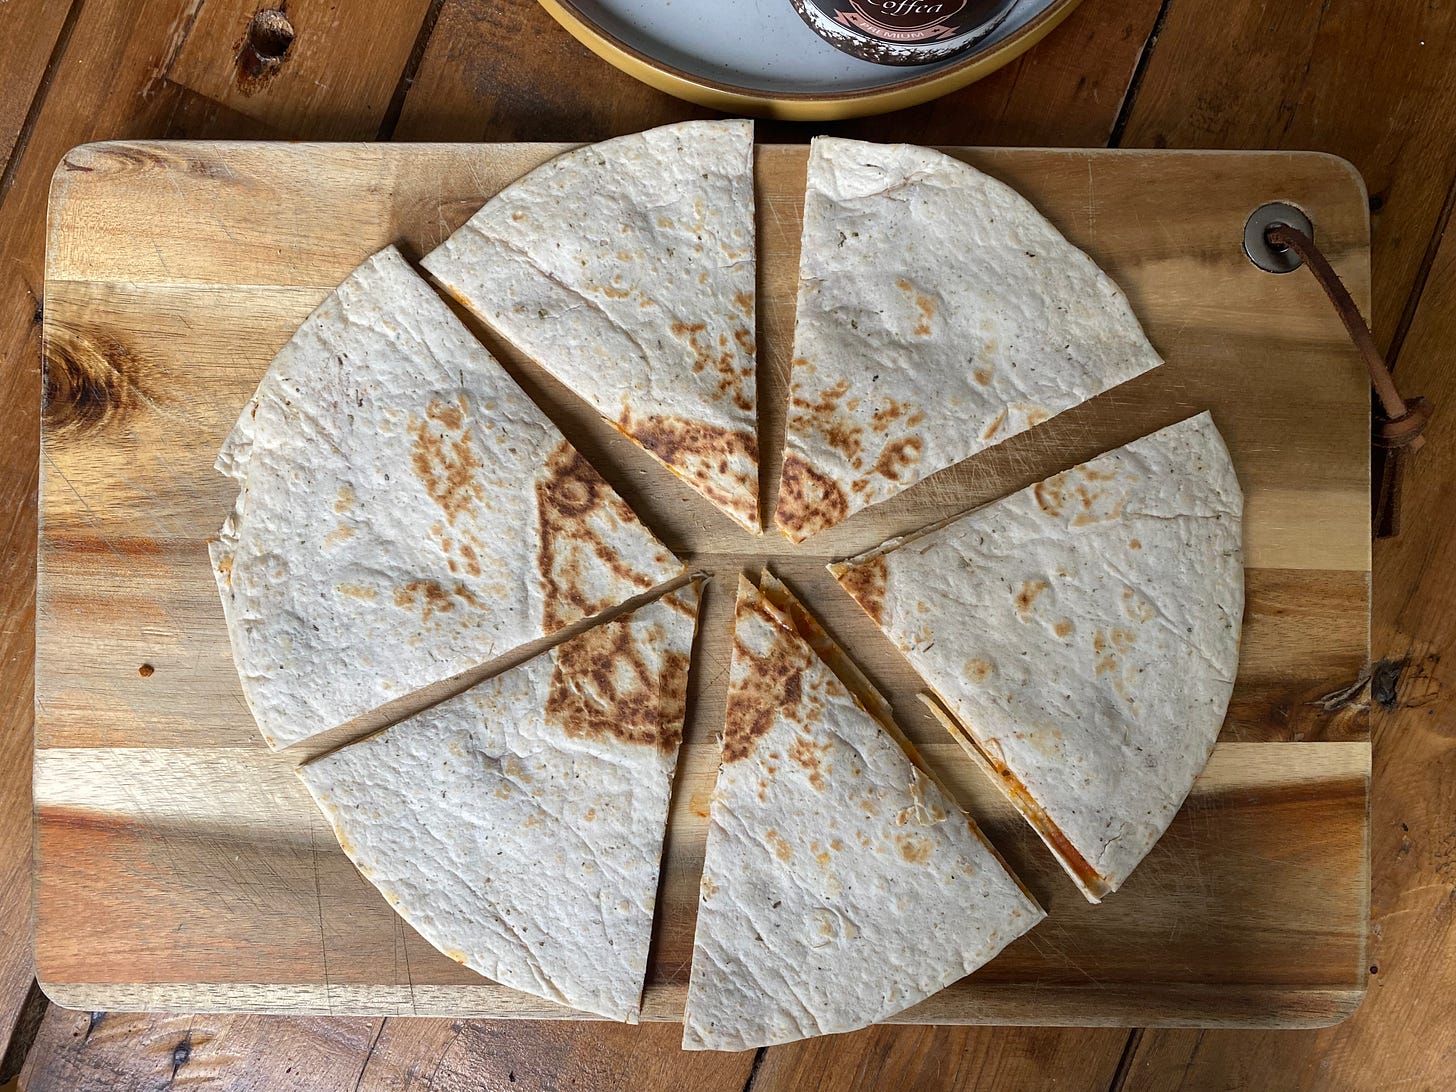 Wooden chopping board topped with a toasted tortilla wrap cut into six pieces.